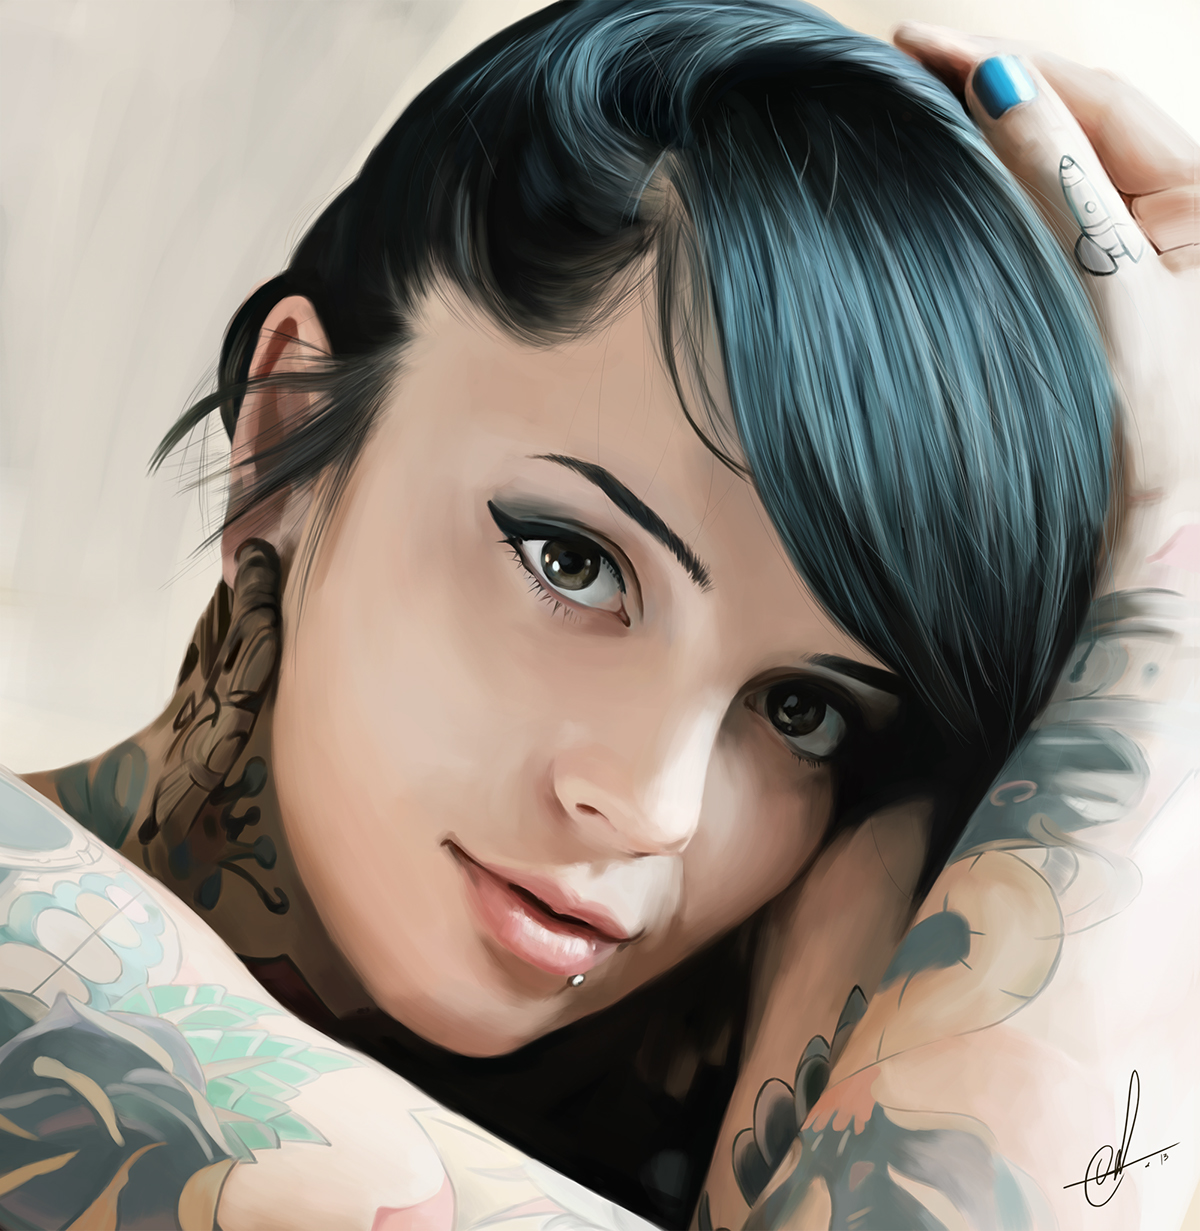 Paintings artist female portraits suicide girls Realism surrealism sketches Expressionism wacom concept art Beautiful tattoos light eyes